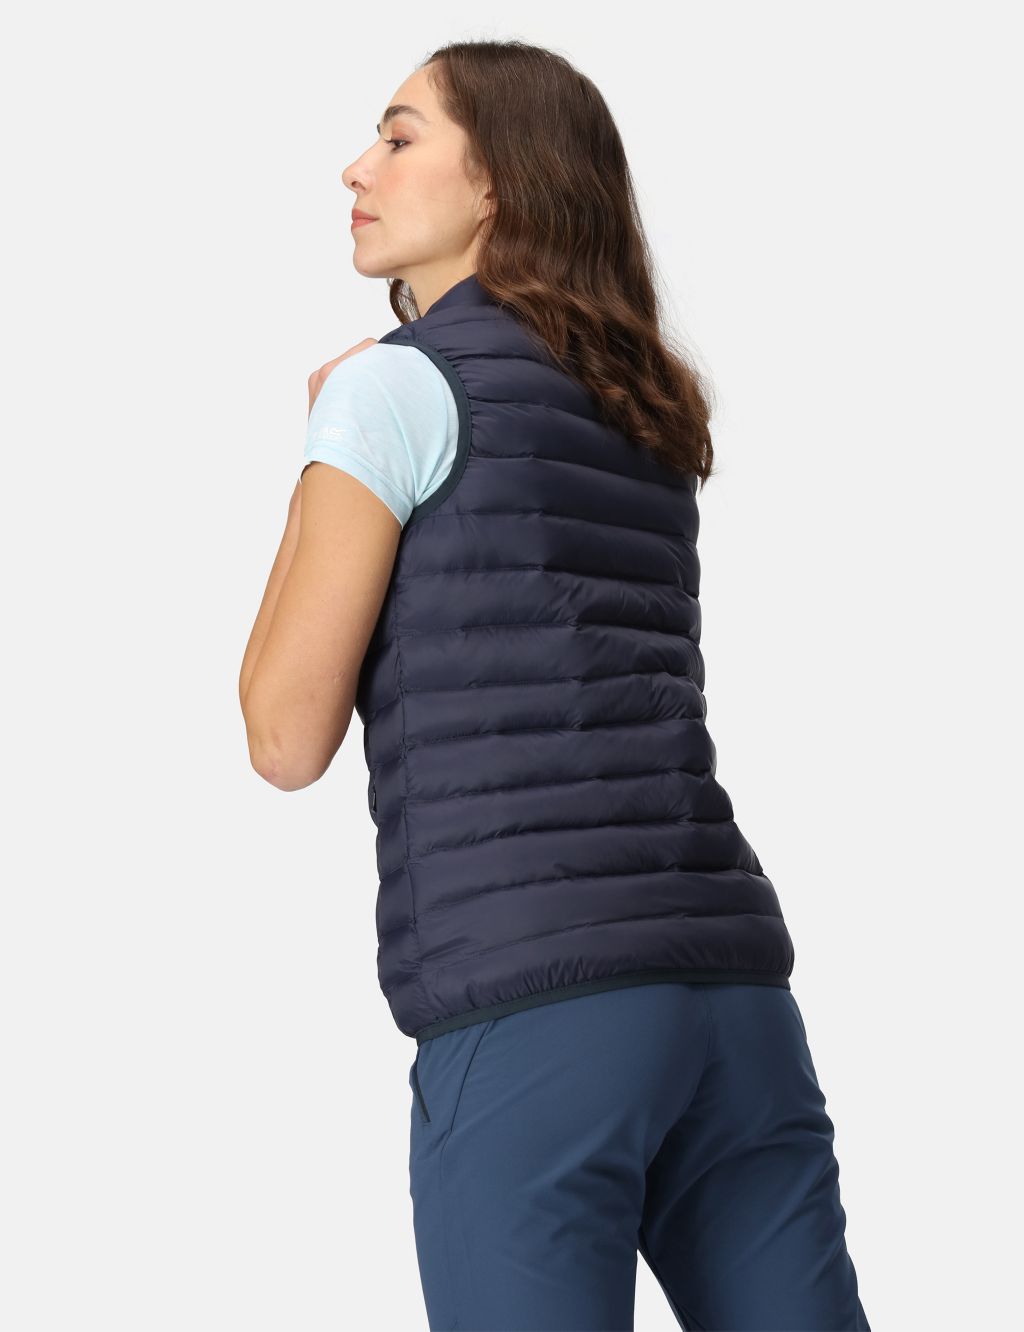 Marizion Water-Repellent Gilet image 3